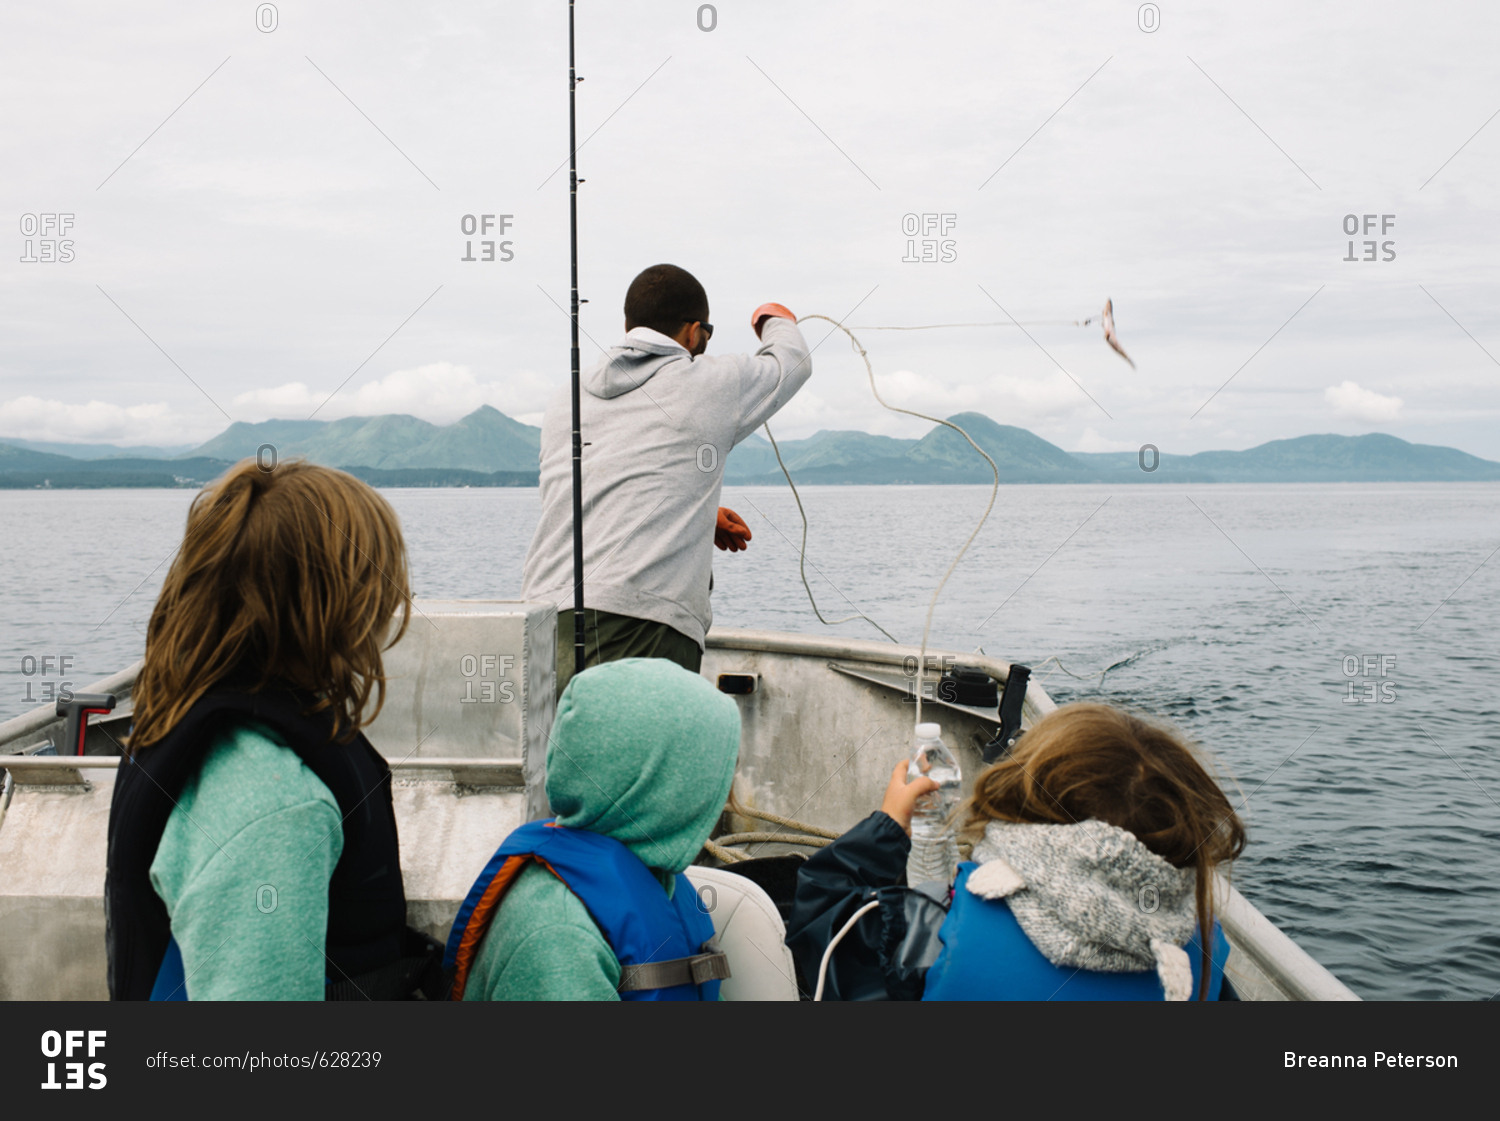 Children watching their father cast a rope into the water while deep water fishing